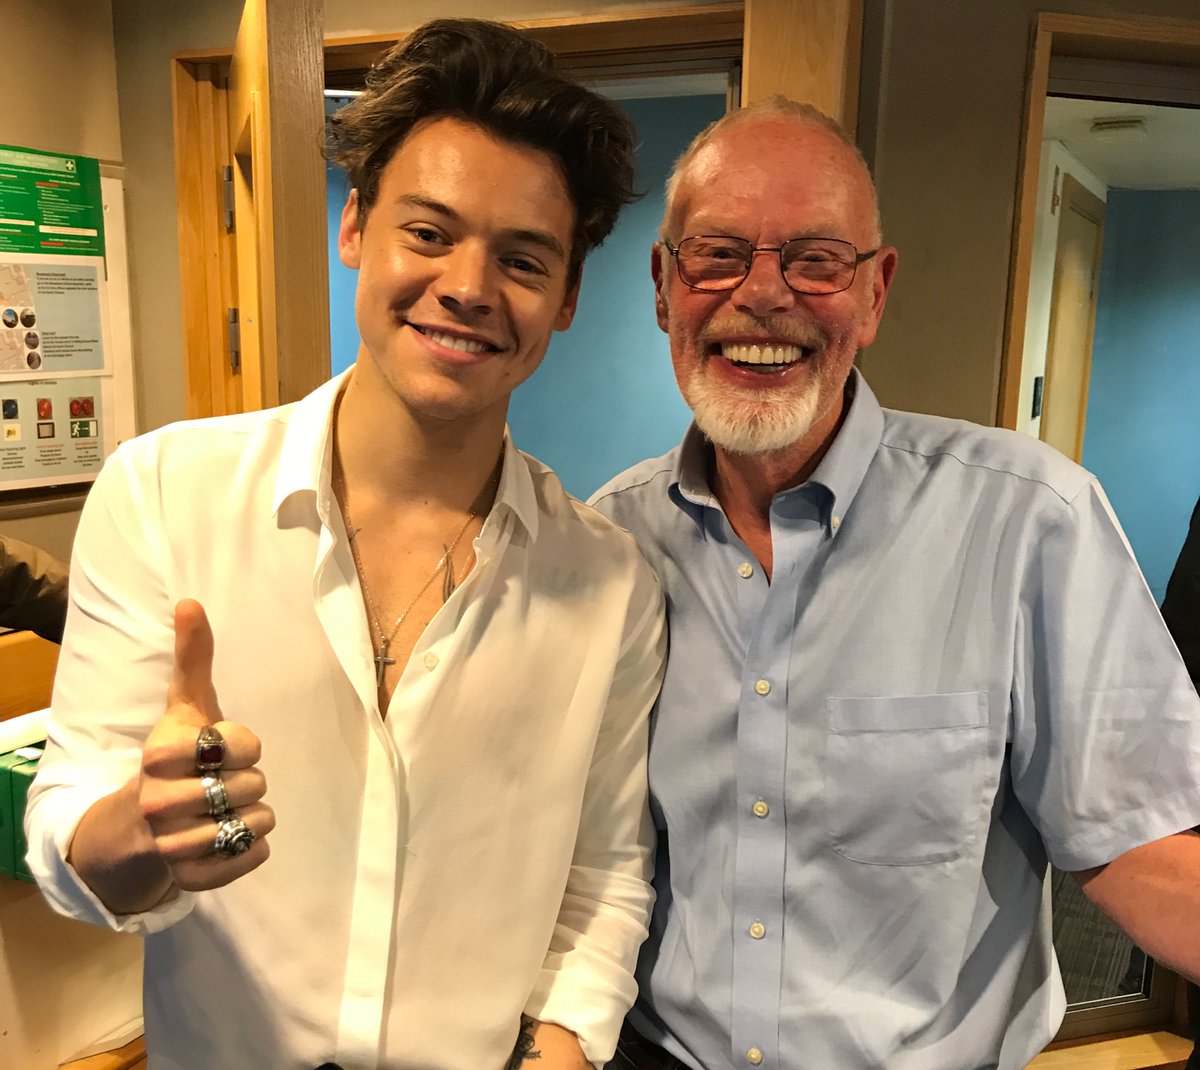 General photo of Harry Styles